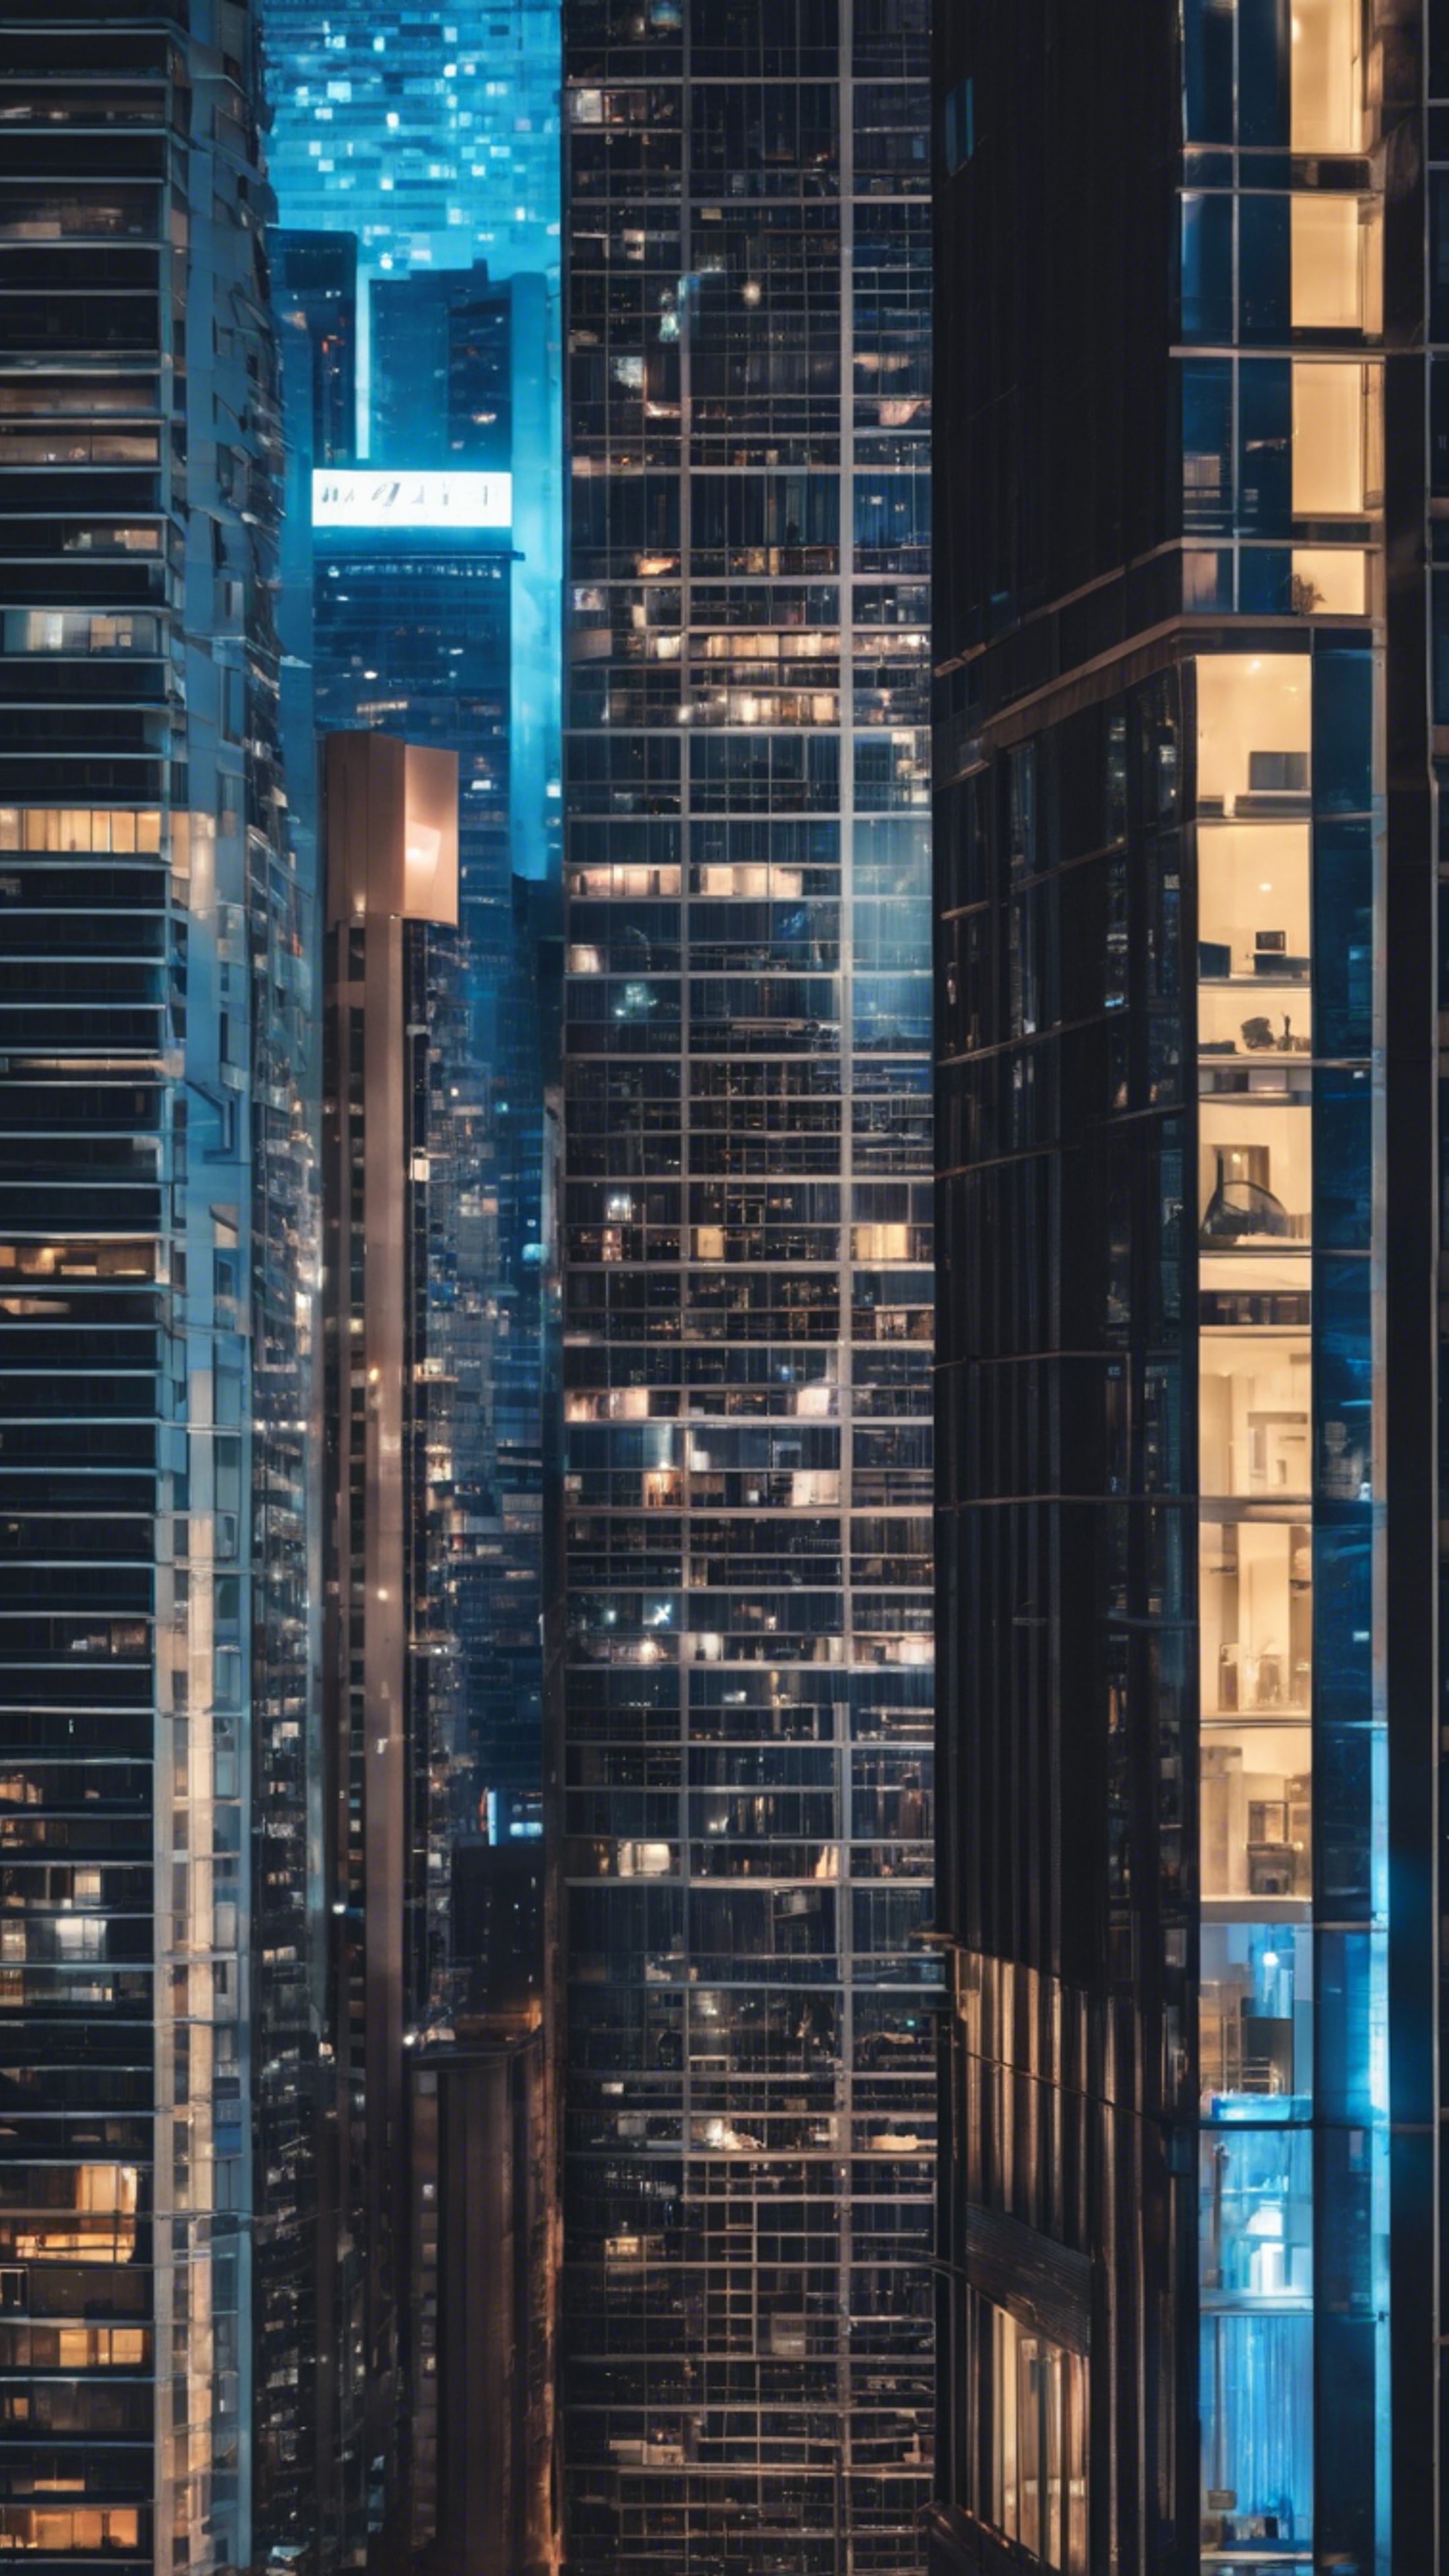 A modern cityscape at night lit by neon blue lights and composed of sleek, black high-rise buildings. Wallpaper[f71515a7cfe5462daf0e]